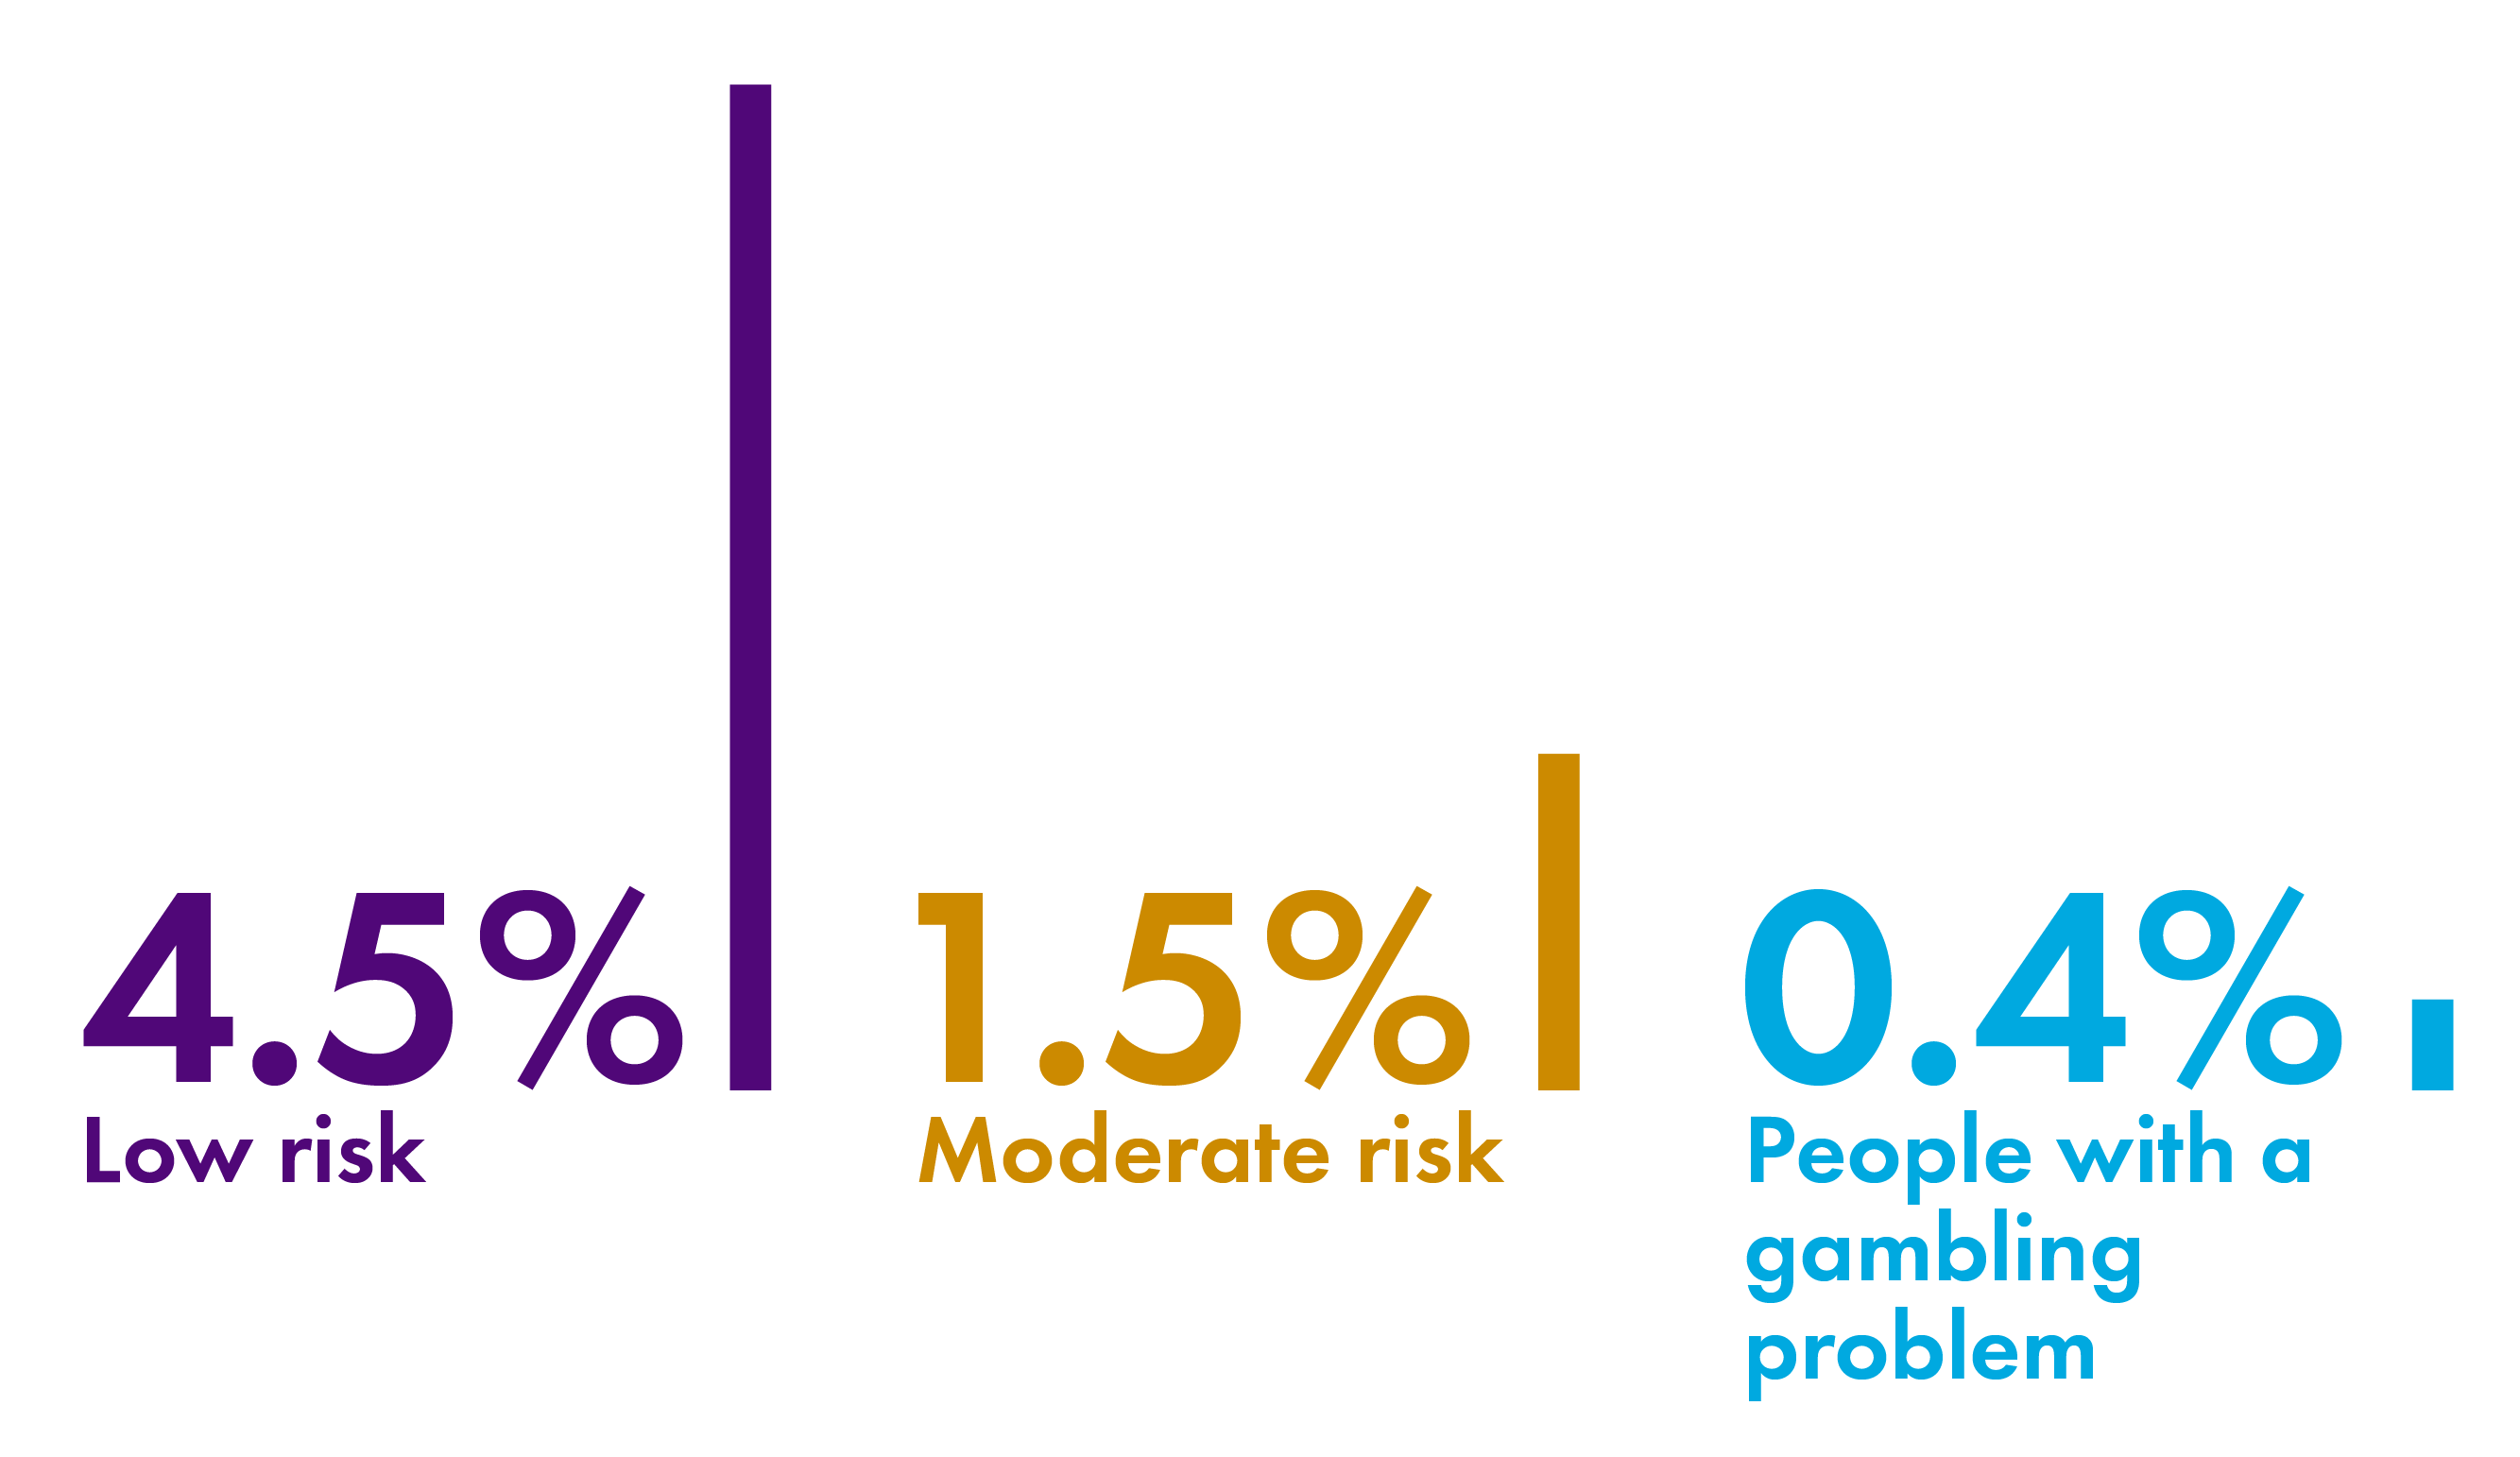 Bar chart showing that of people surveyed in the Scottish Health Survey 2021, 0.4% were people with a gambling problem. The chart also shows that 4.5% were people with low risk and 1.5% were people with moderate risk of a gambling problem.